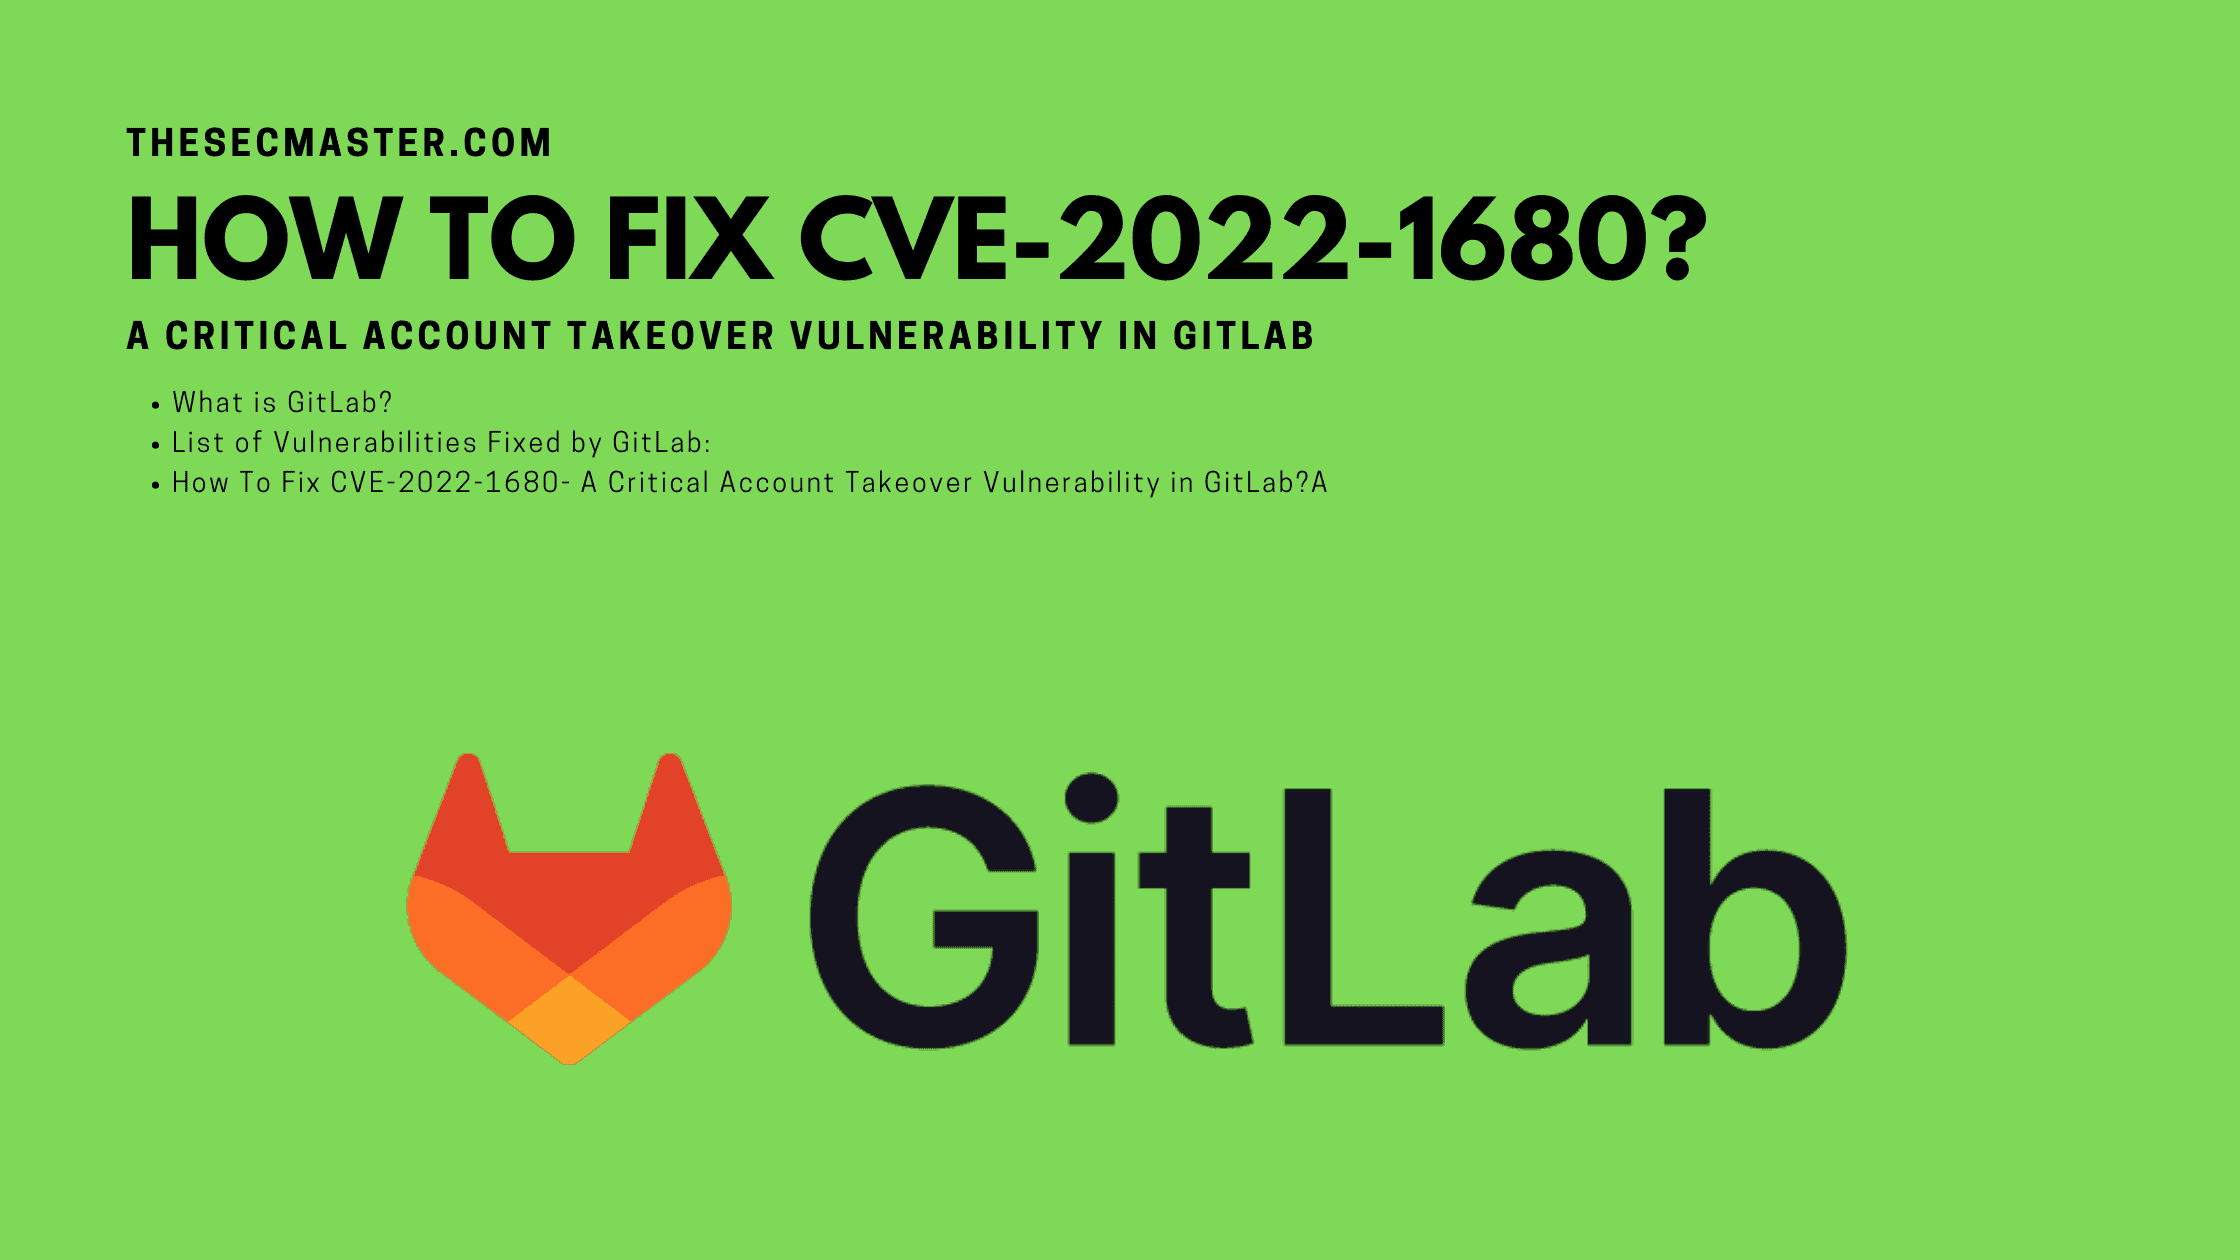 How To Fix Cve 2022 1680 A Critical Account Takeover Vulnerability In Gitlab